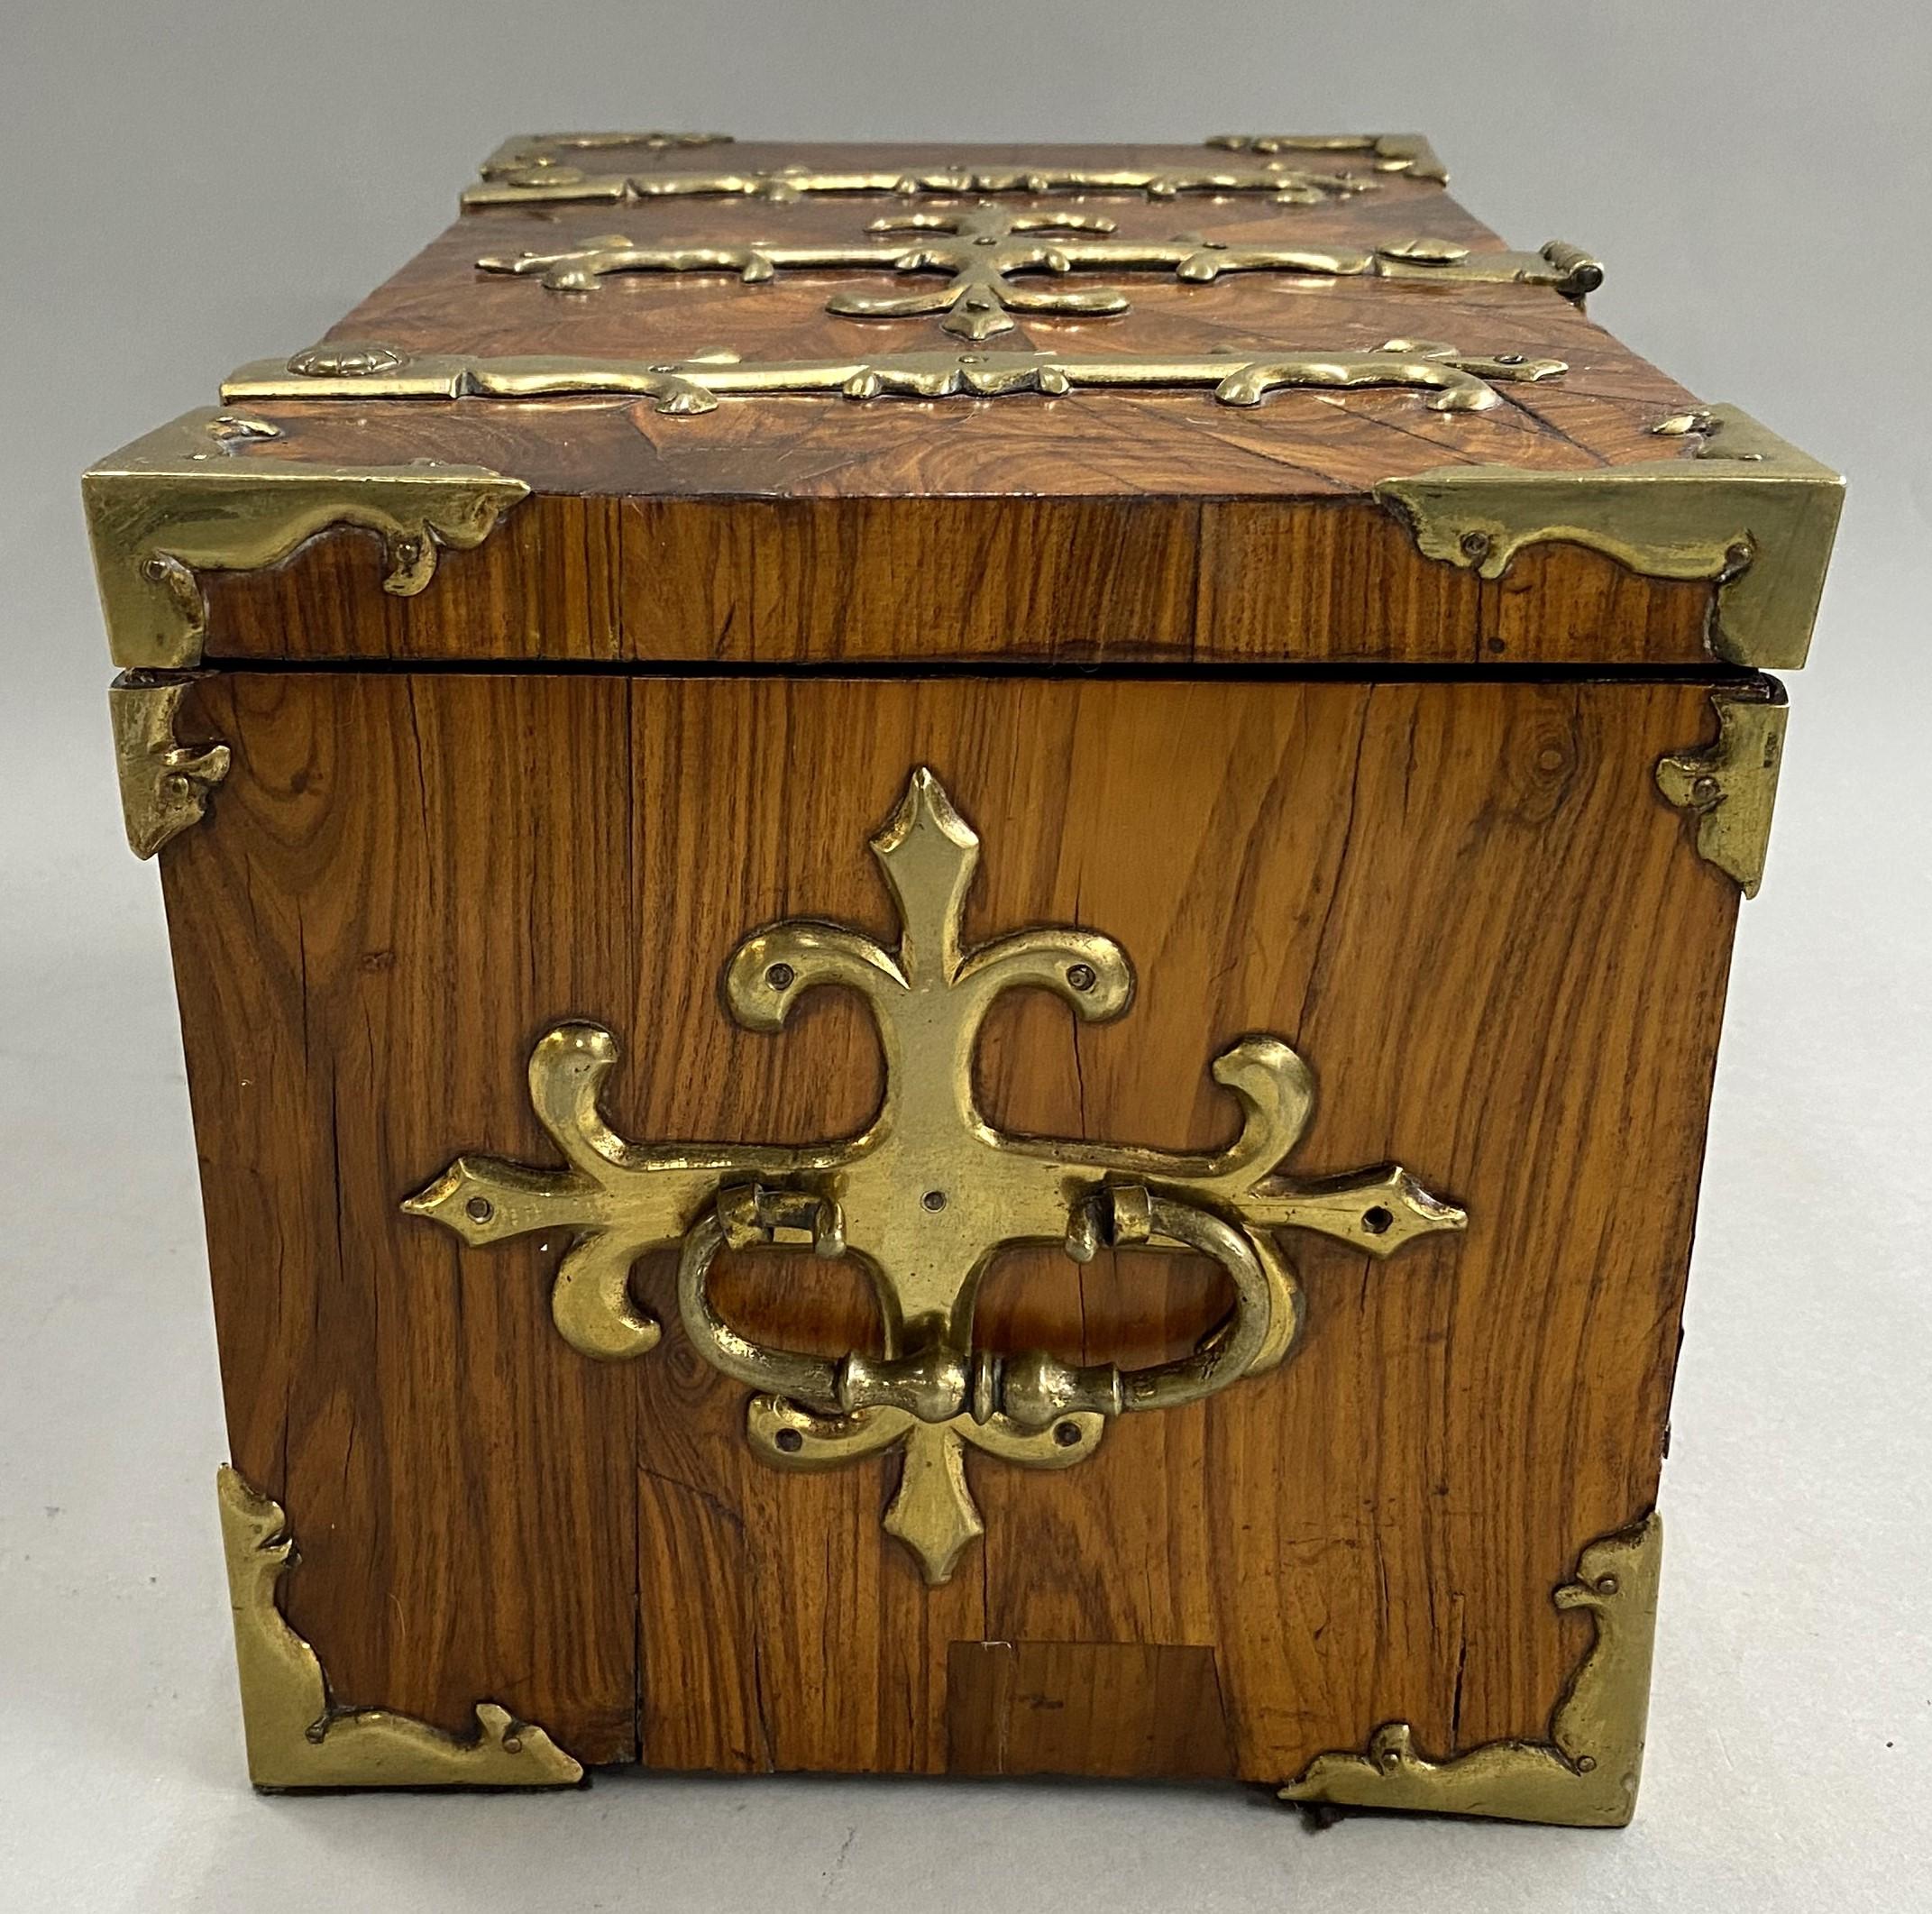 Late 17th Century Rare 17th Century English Coffre Fort or Strong Box, circa 1690 For Sale